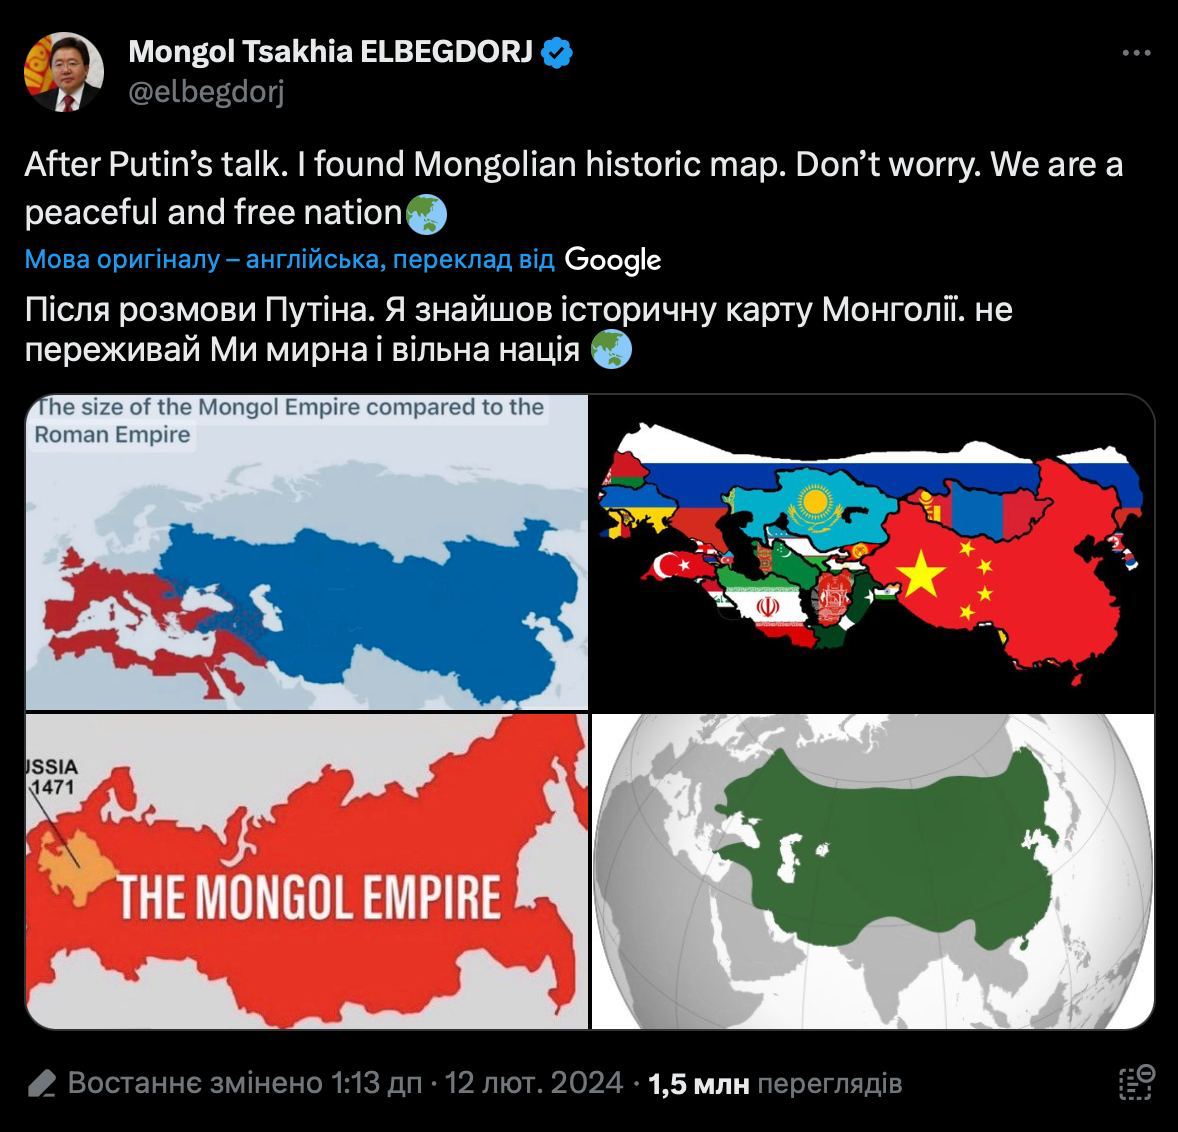 Ex-Mongolian leader invokes Genghis Khan's vast empire in response to Putin's mad claims